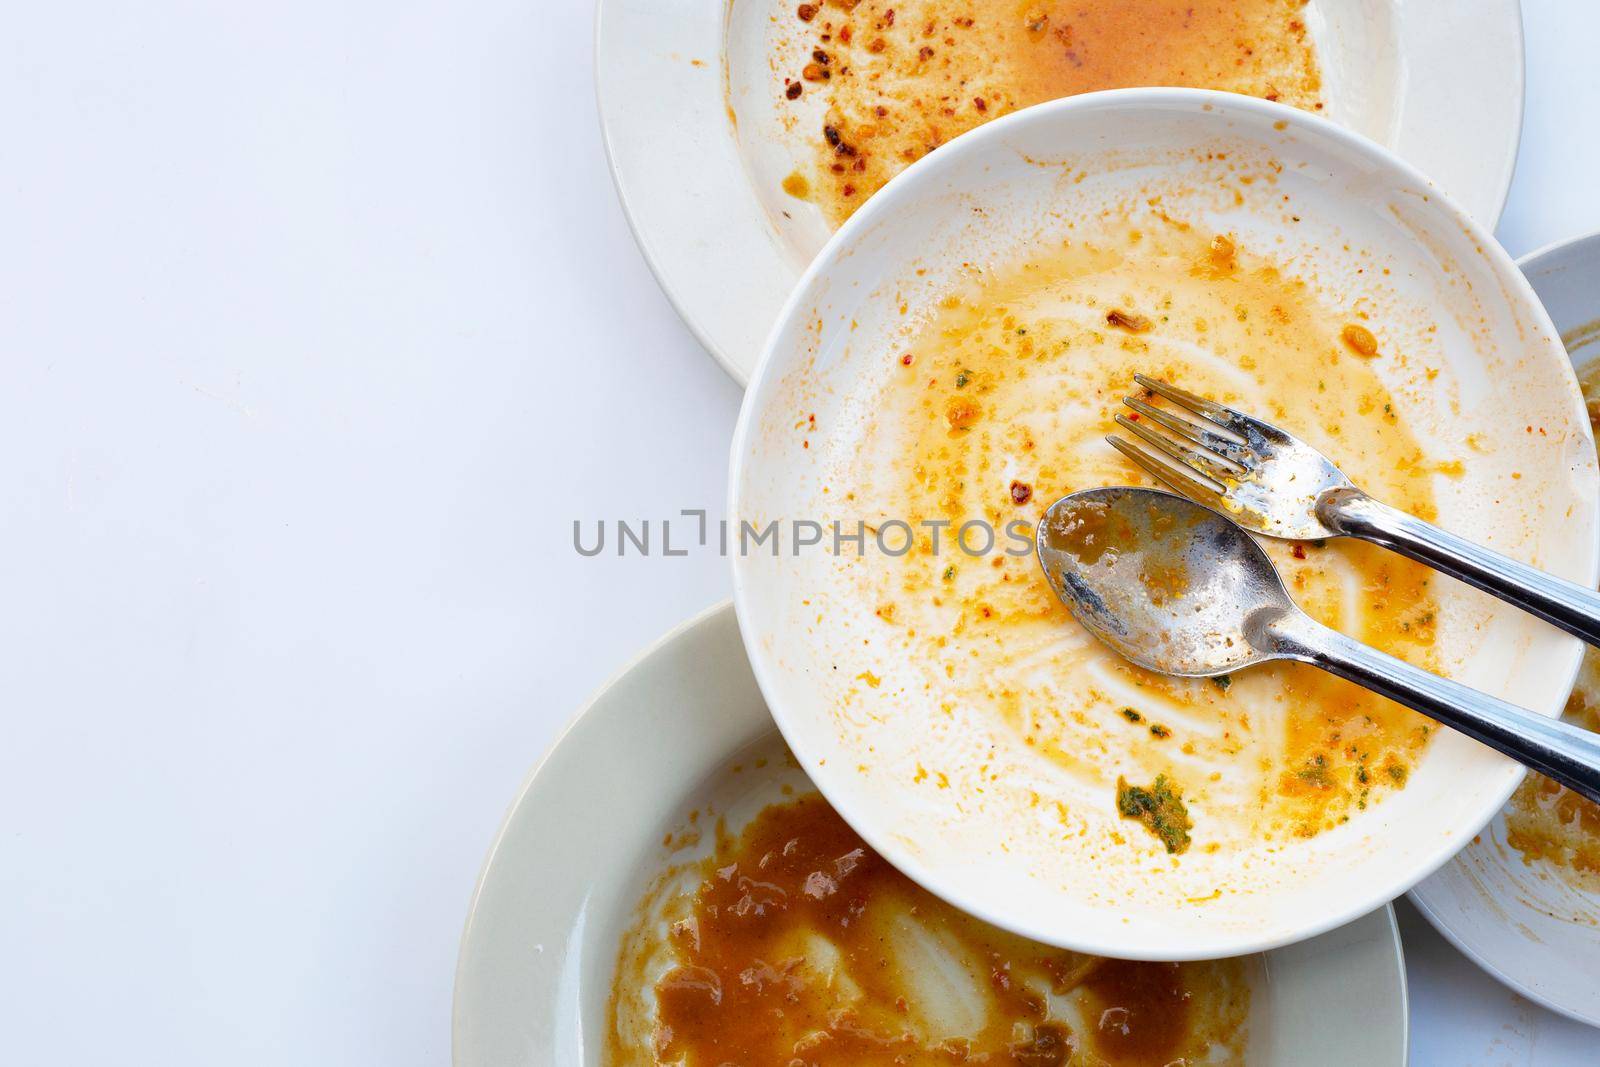 Dirty dishes on white background. Top view by Bowonpat